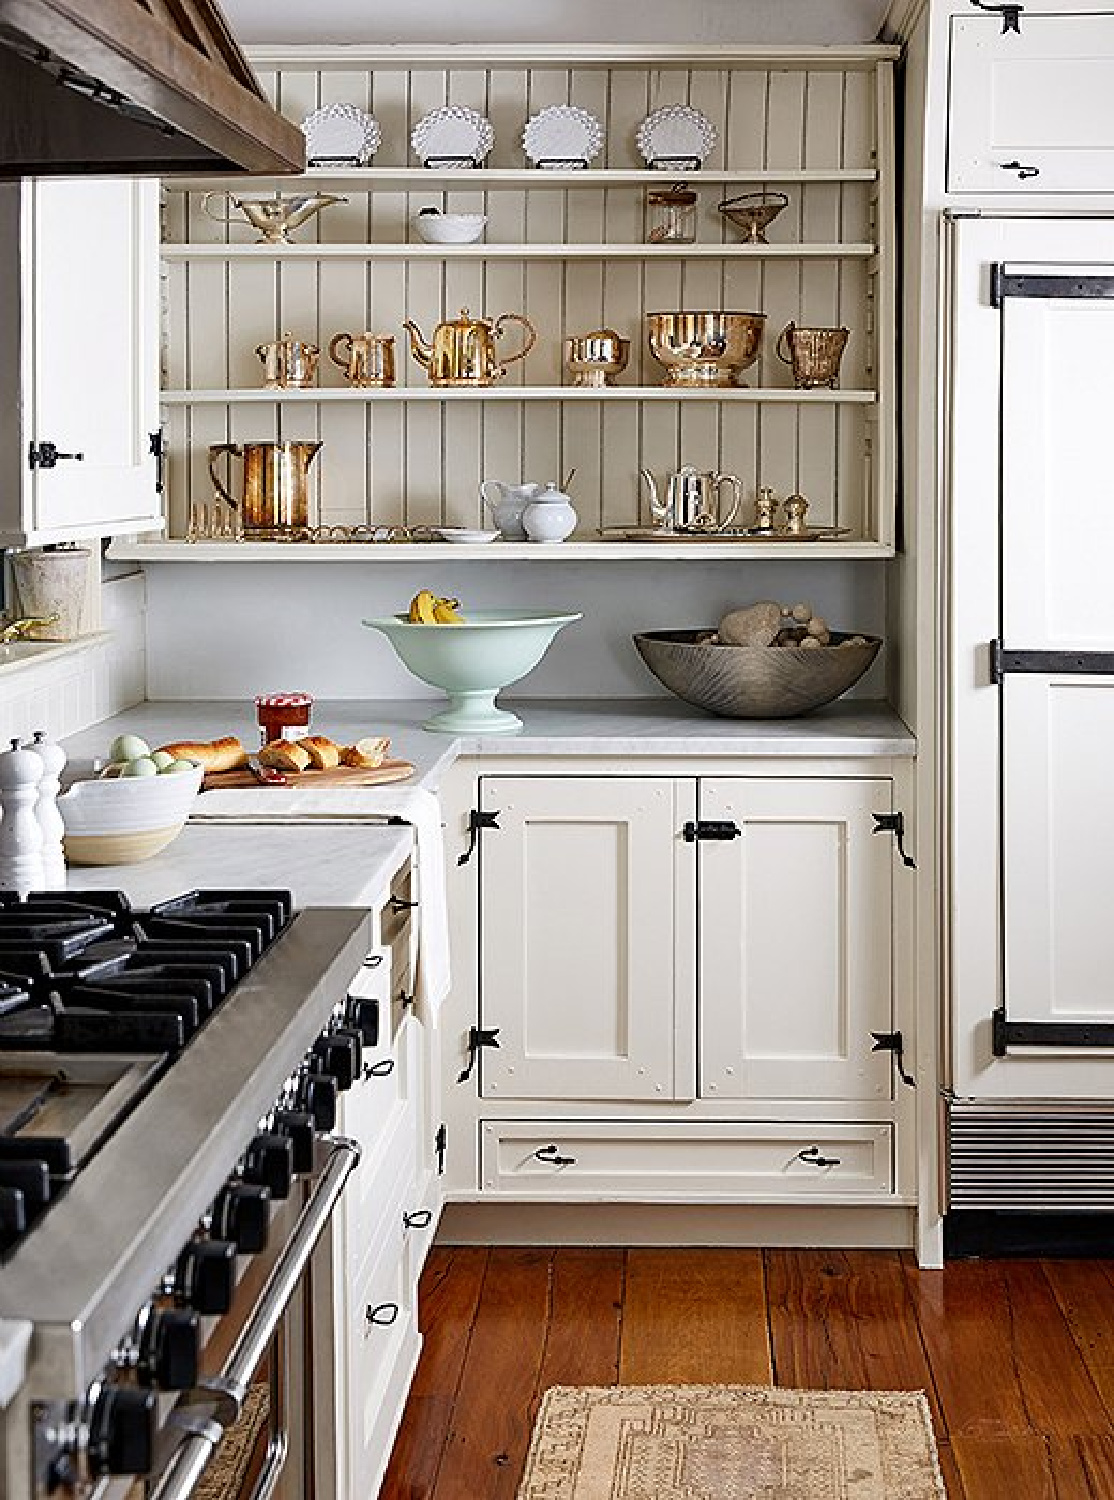 Classic white country kitchen in a New England farmhouse by OKL.